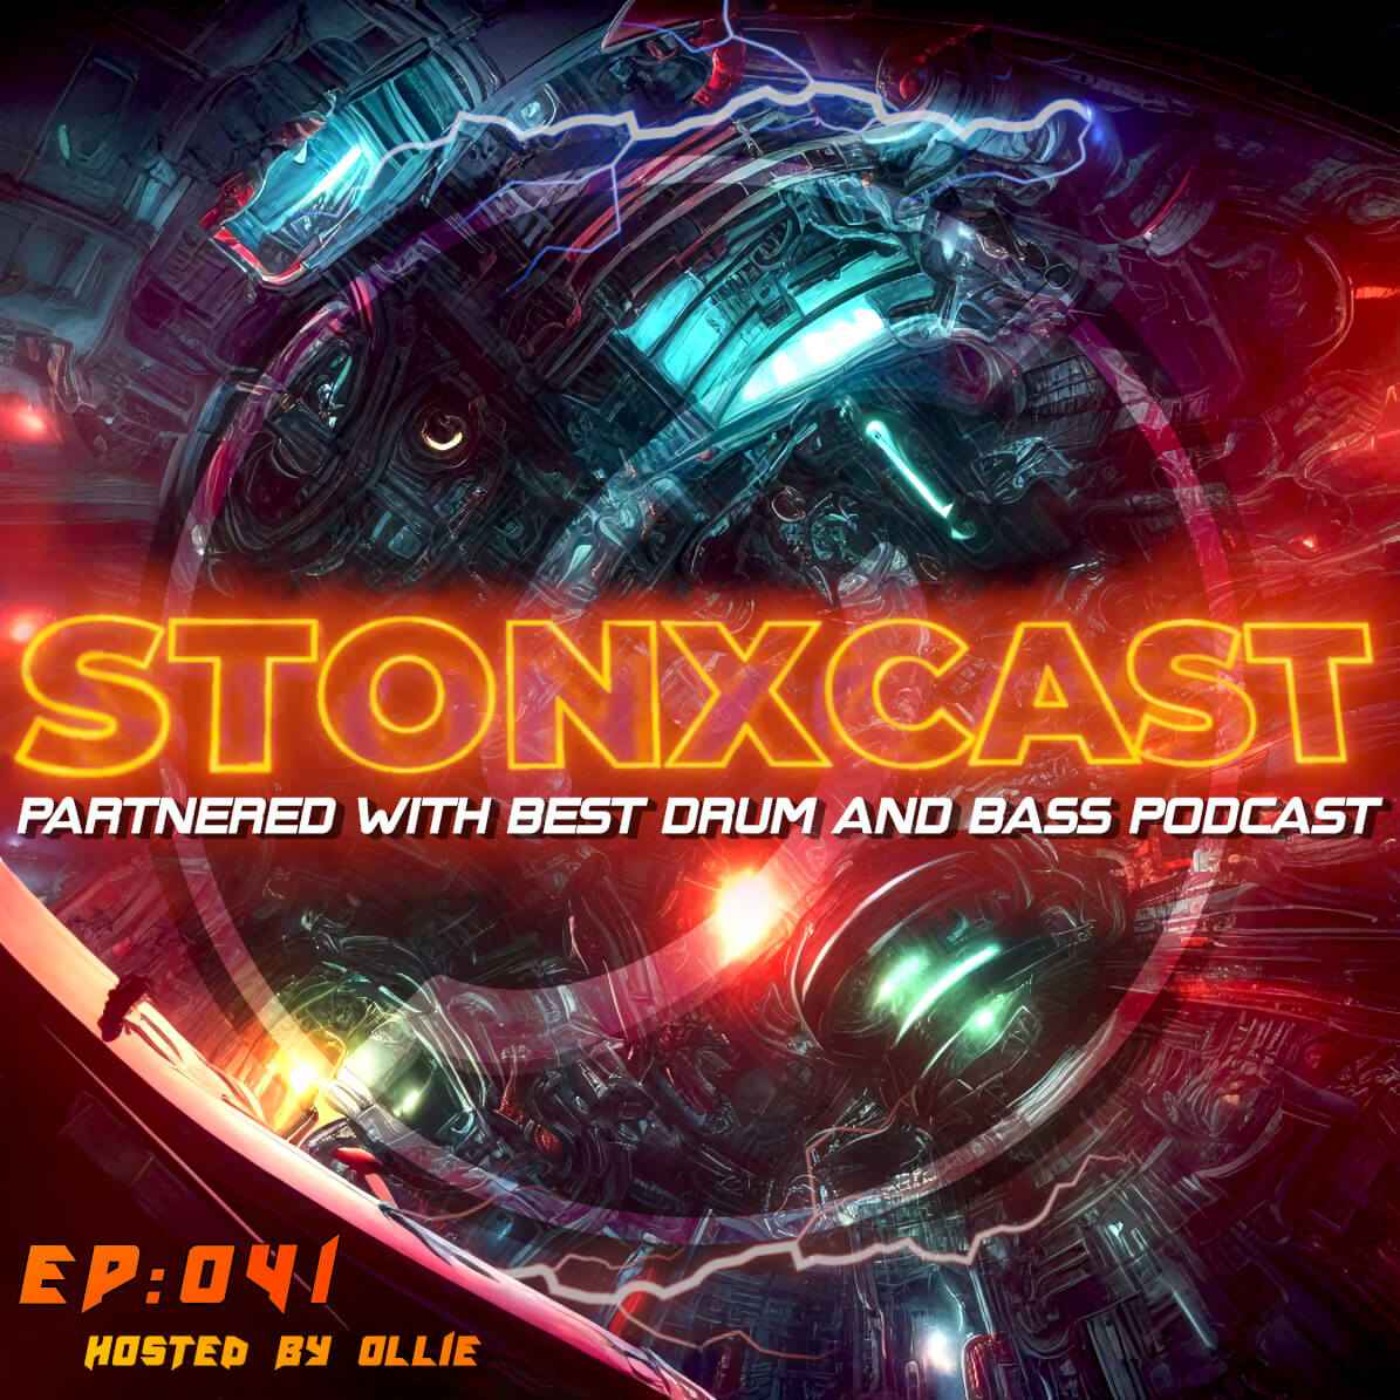 Stonxcast EP:041 - Hosted by Ollie, Guest Mix from GU:STUFF Artwork